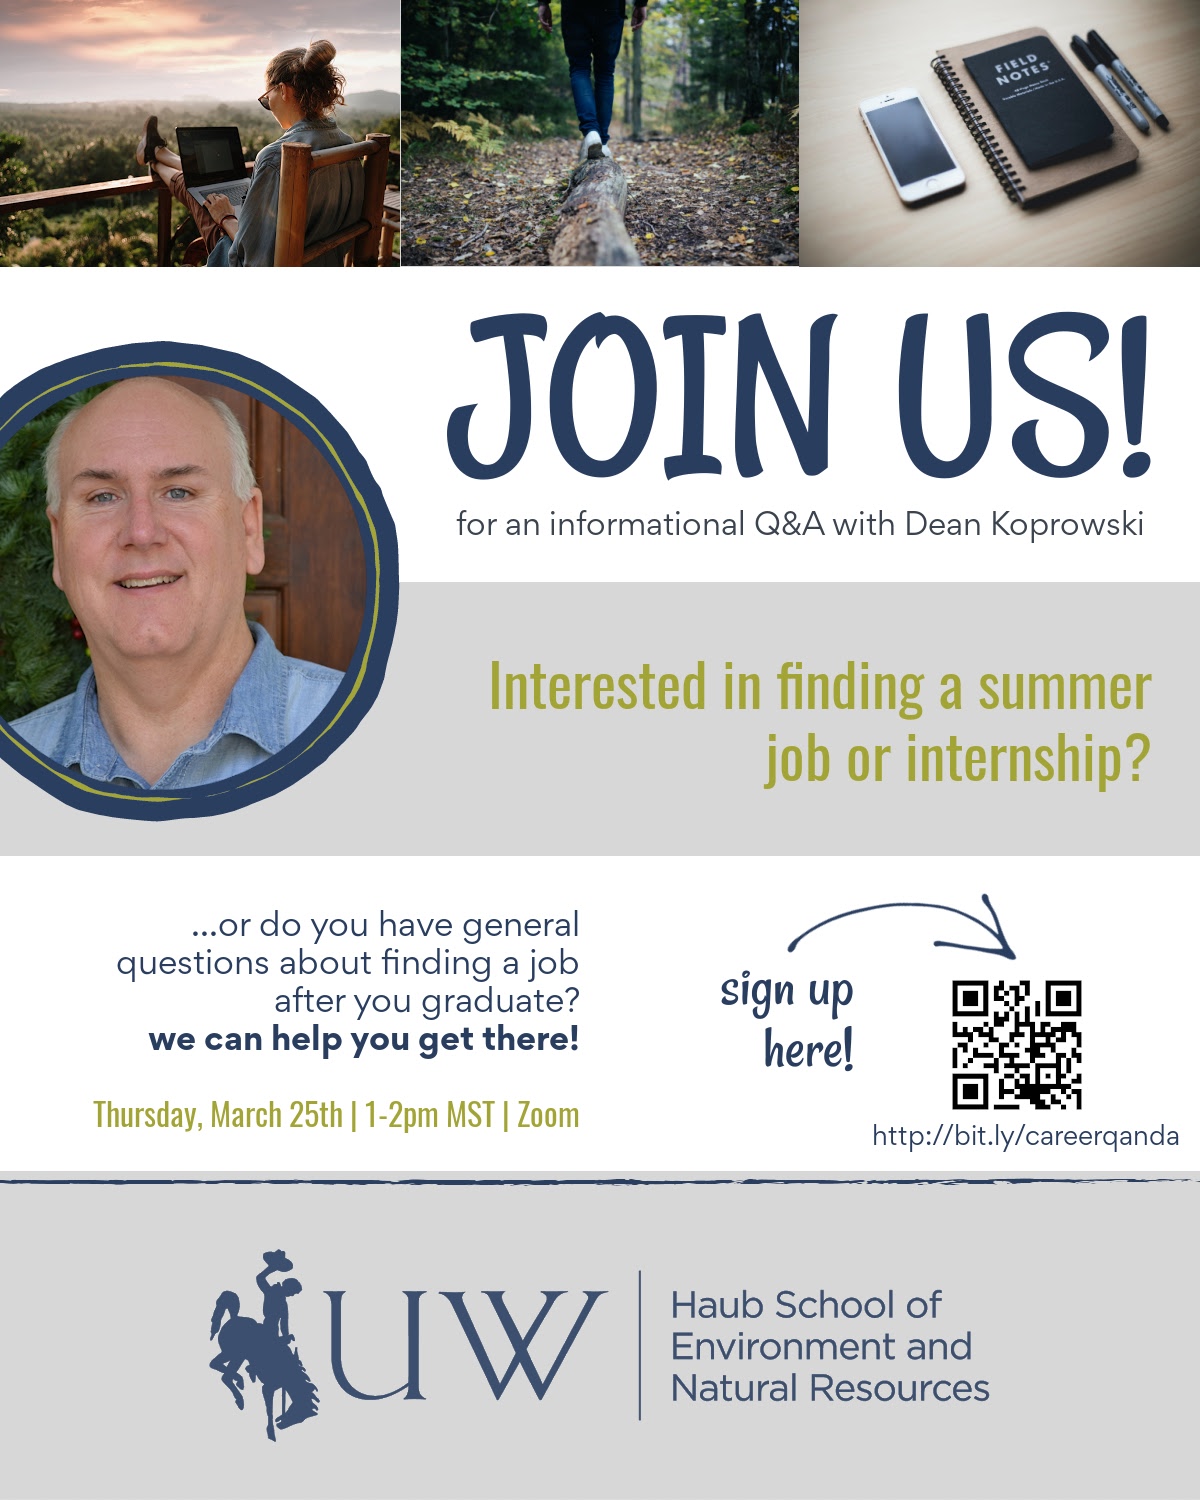 Informational Q&A with Dean Koprowski